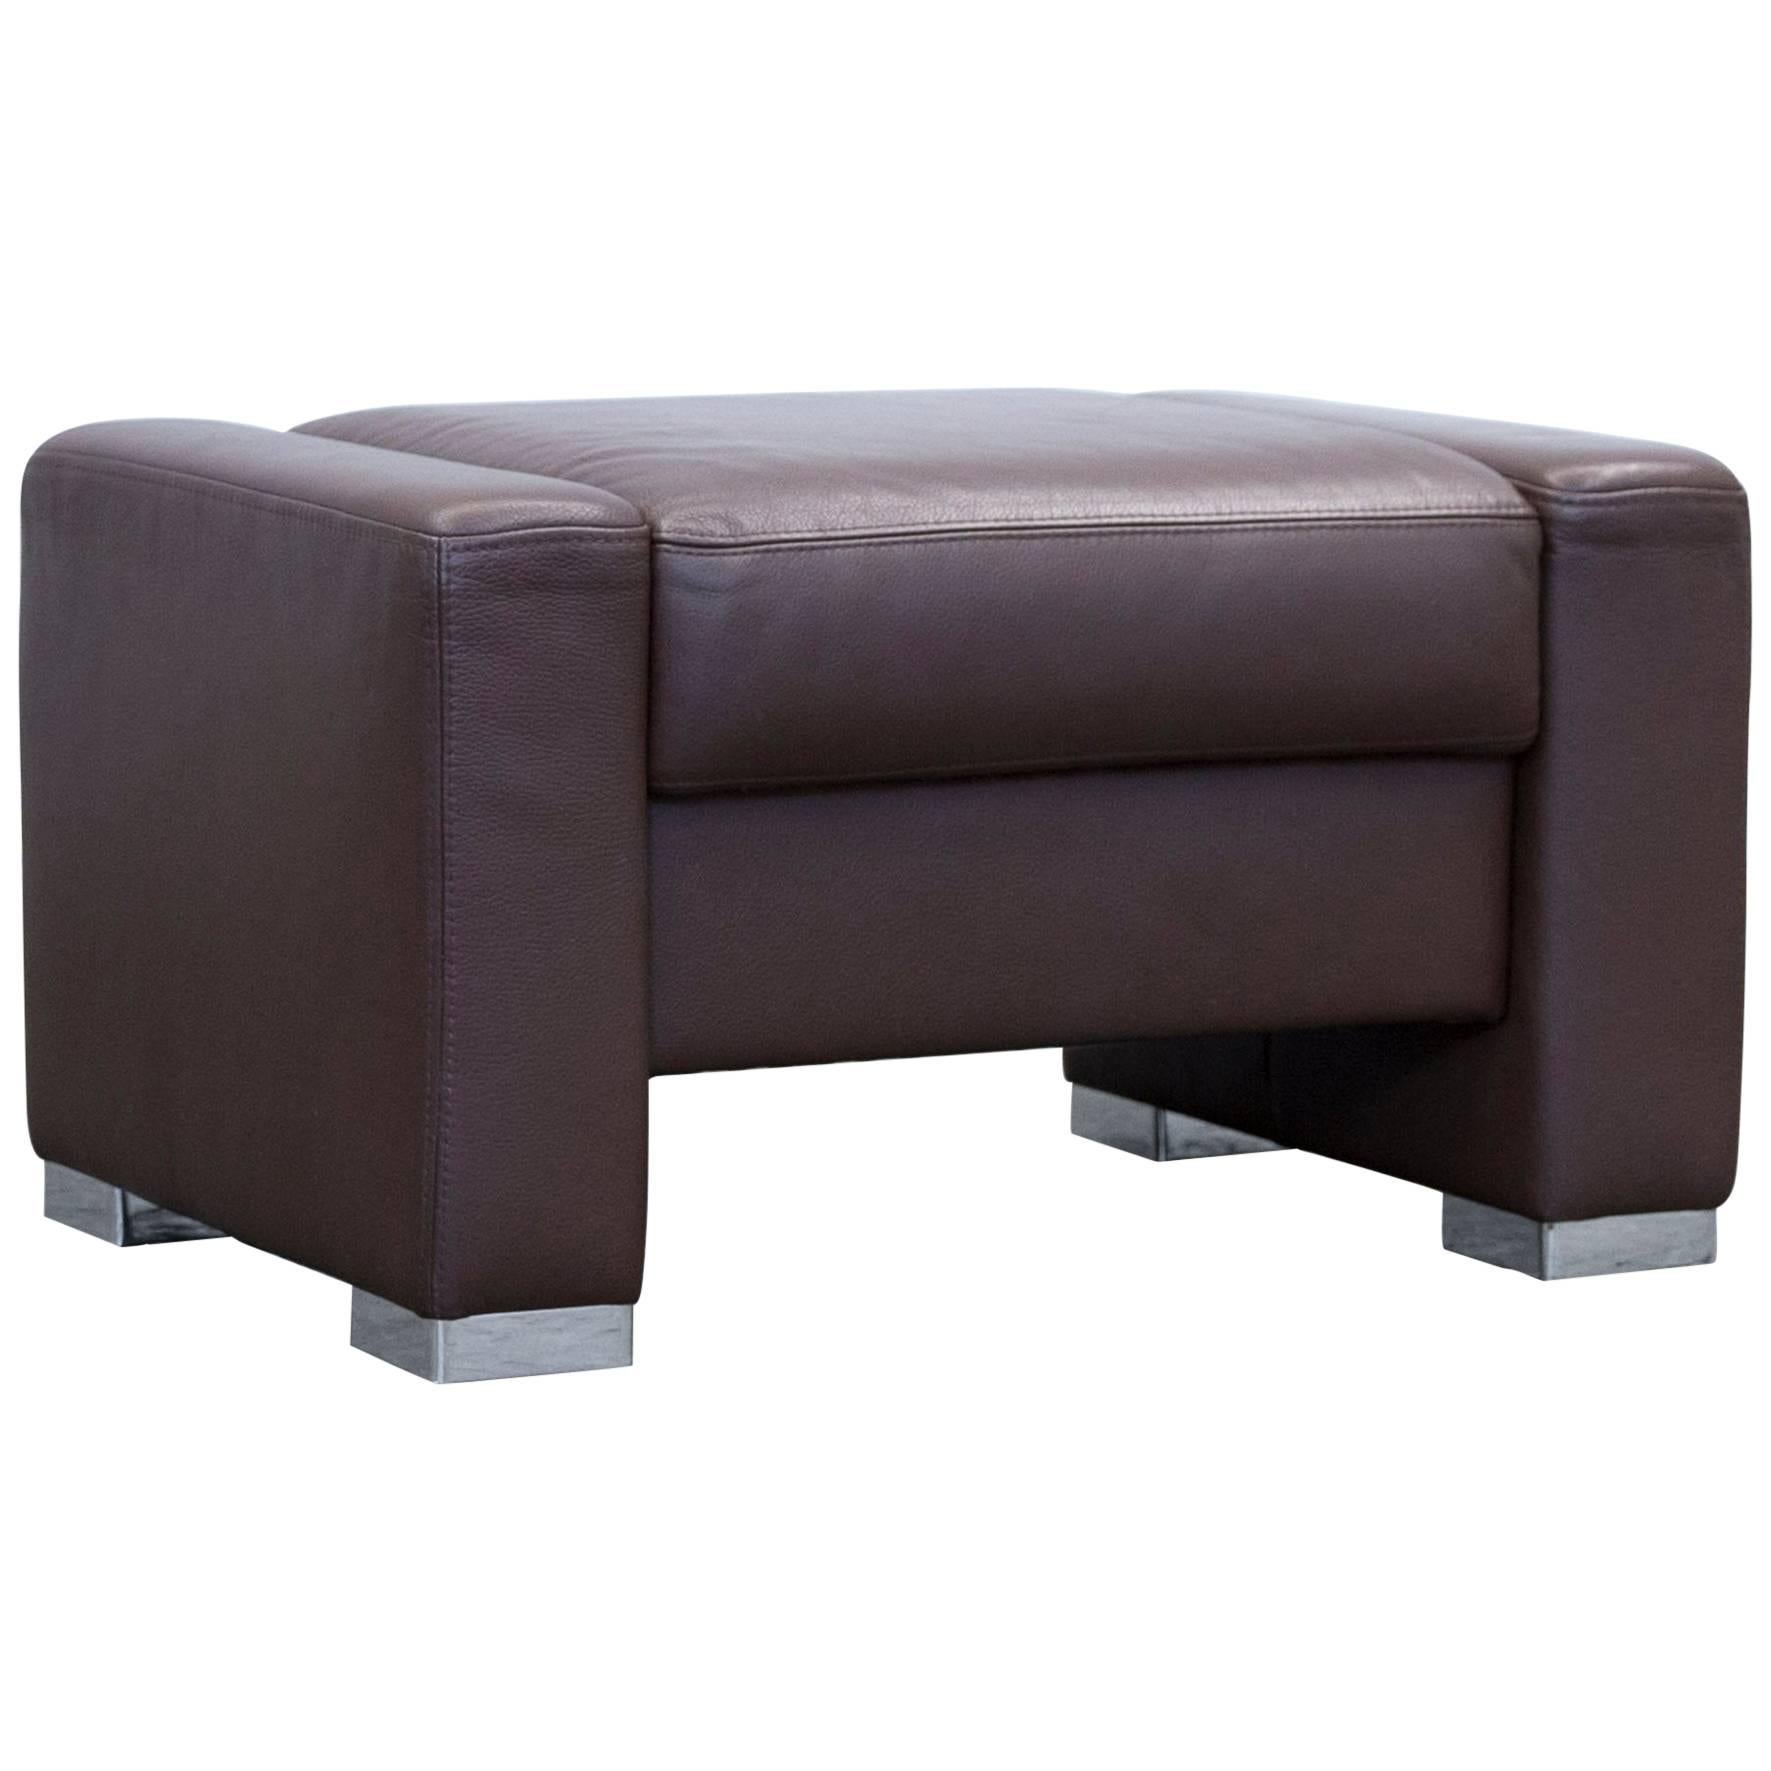 Brühl & Sippold Designer Chair Leather Brown Function Couch Modern